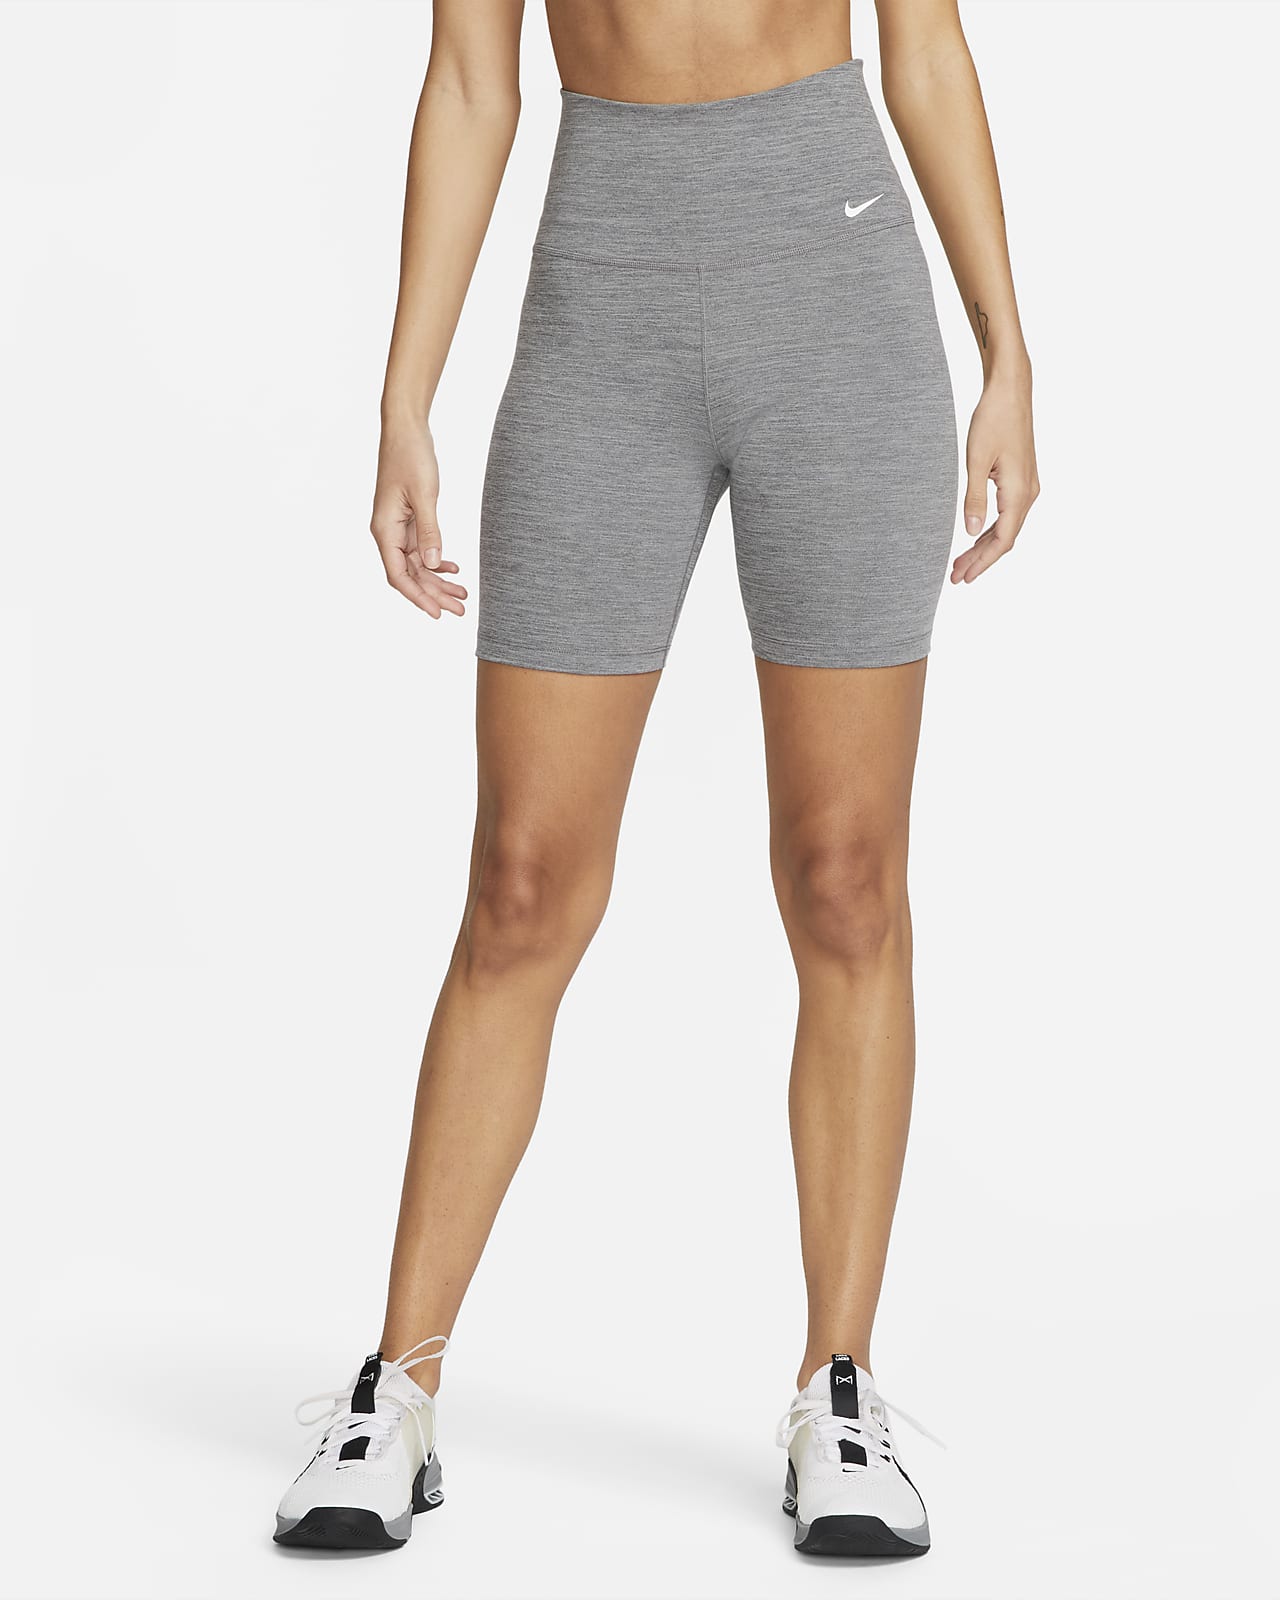 Christmas High Waisted Booty Shorts, Compressive